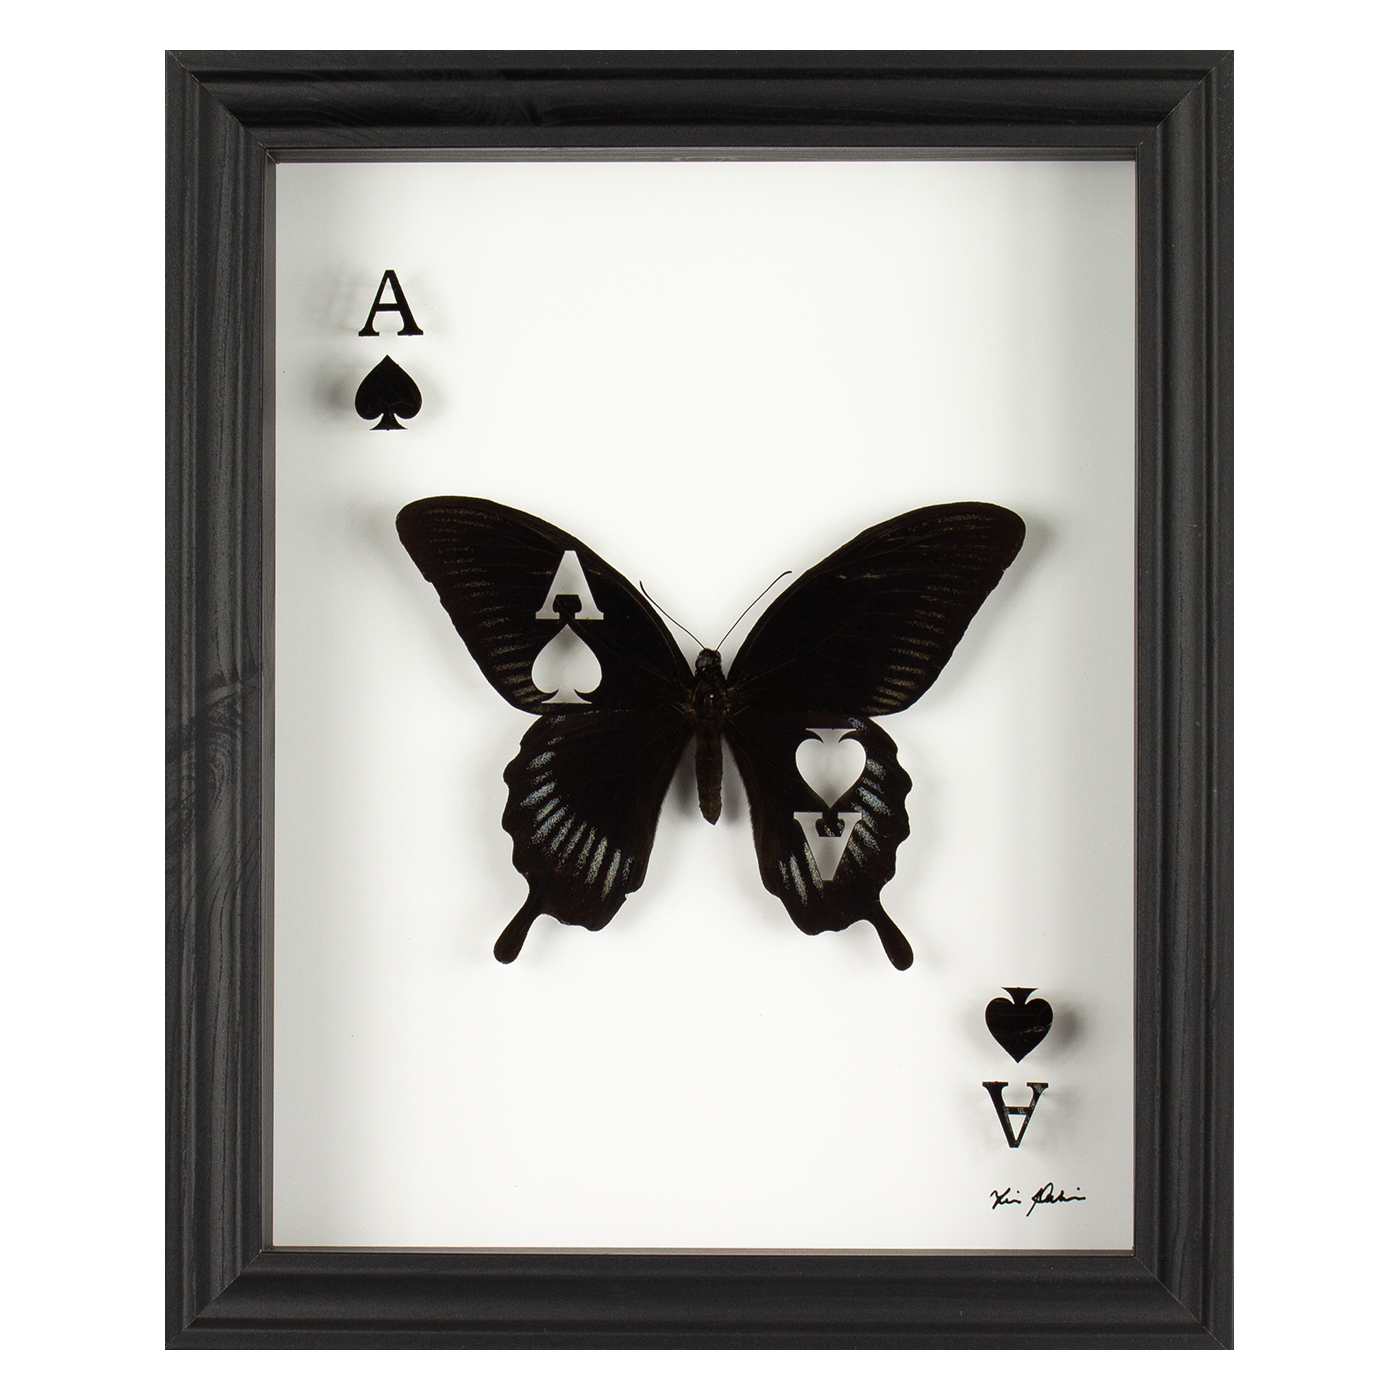 Chance One taxidermy artwork, real butterfly cut into the Ace of Spades